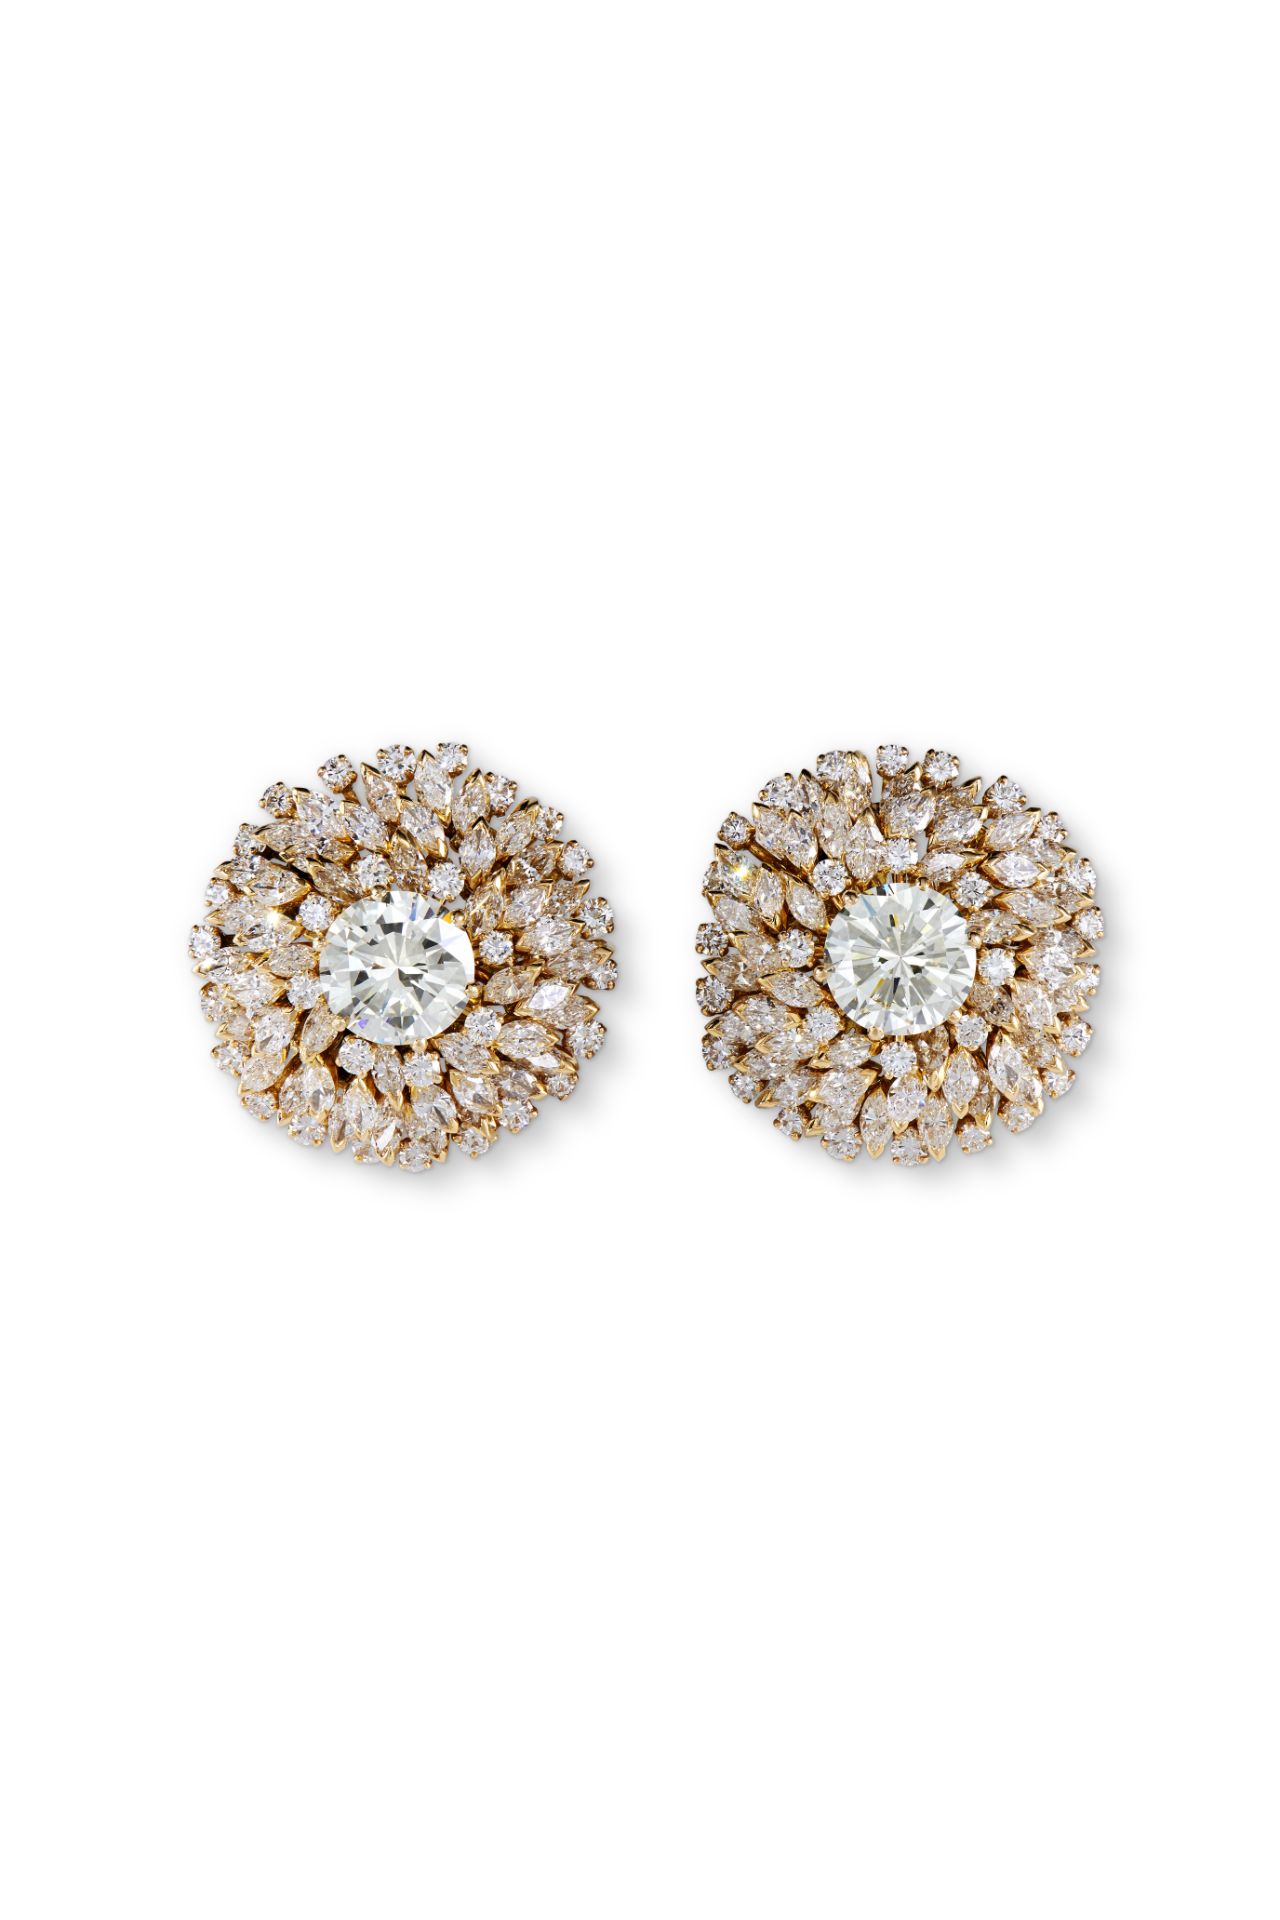 BULGARI, AN IMPORTANT DIAMOND BROOCH AND EARRINGS SUITE in 18ct yellow gold, each earring set wit... - Image 3 of 3